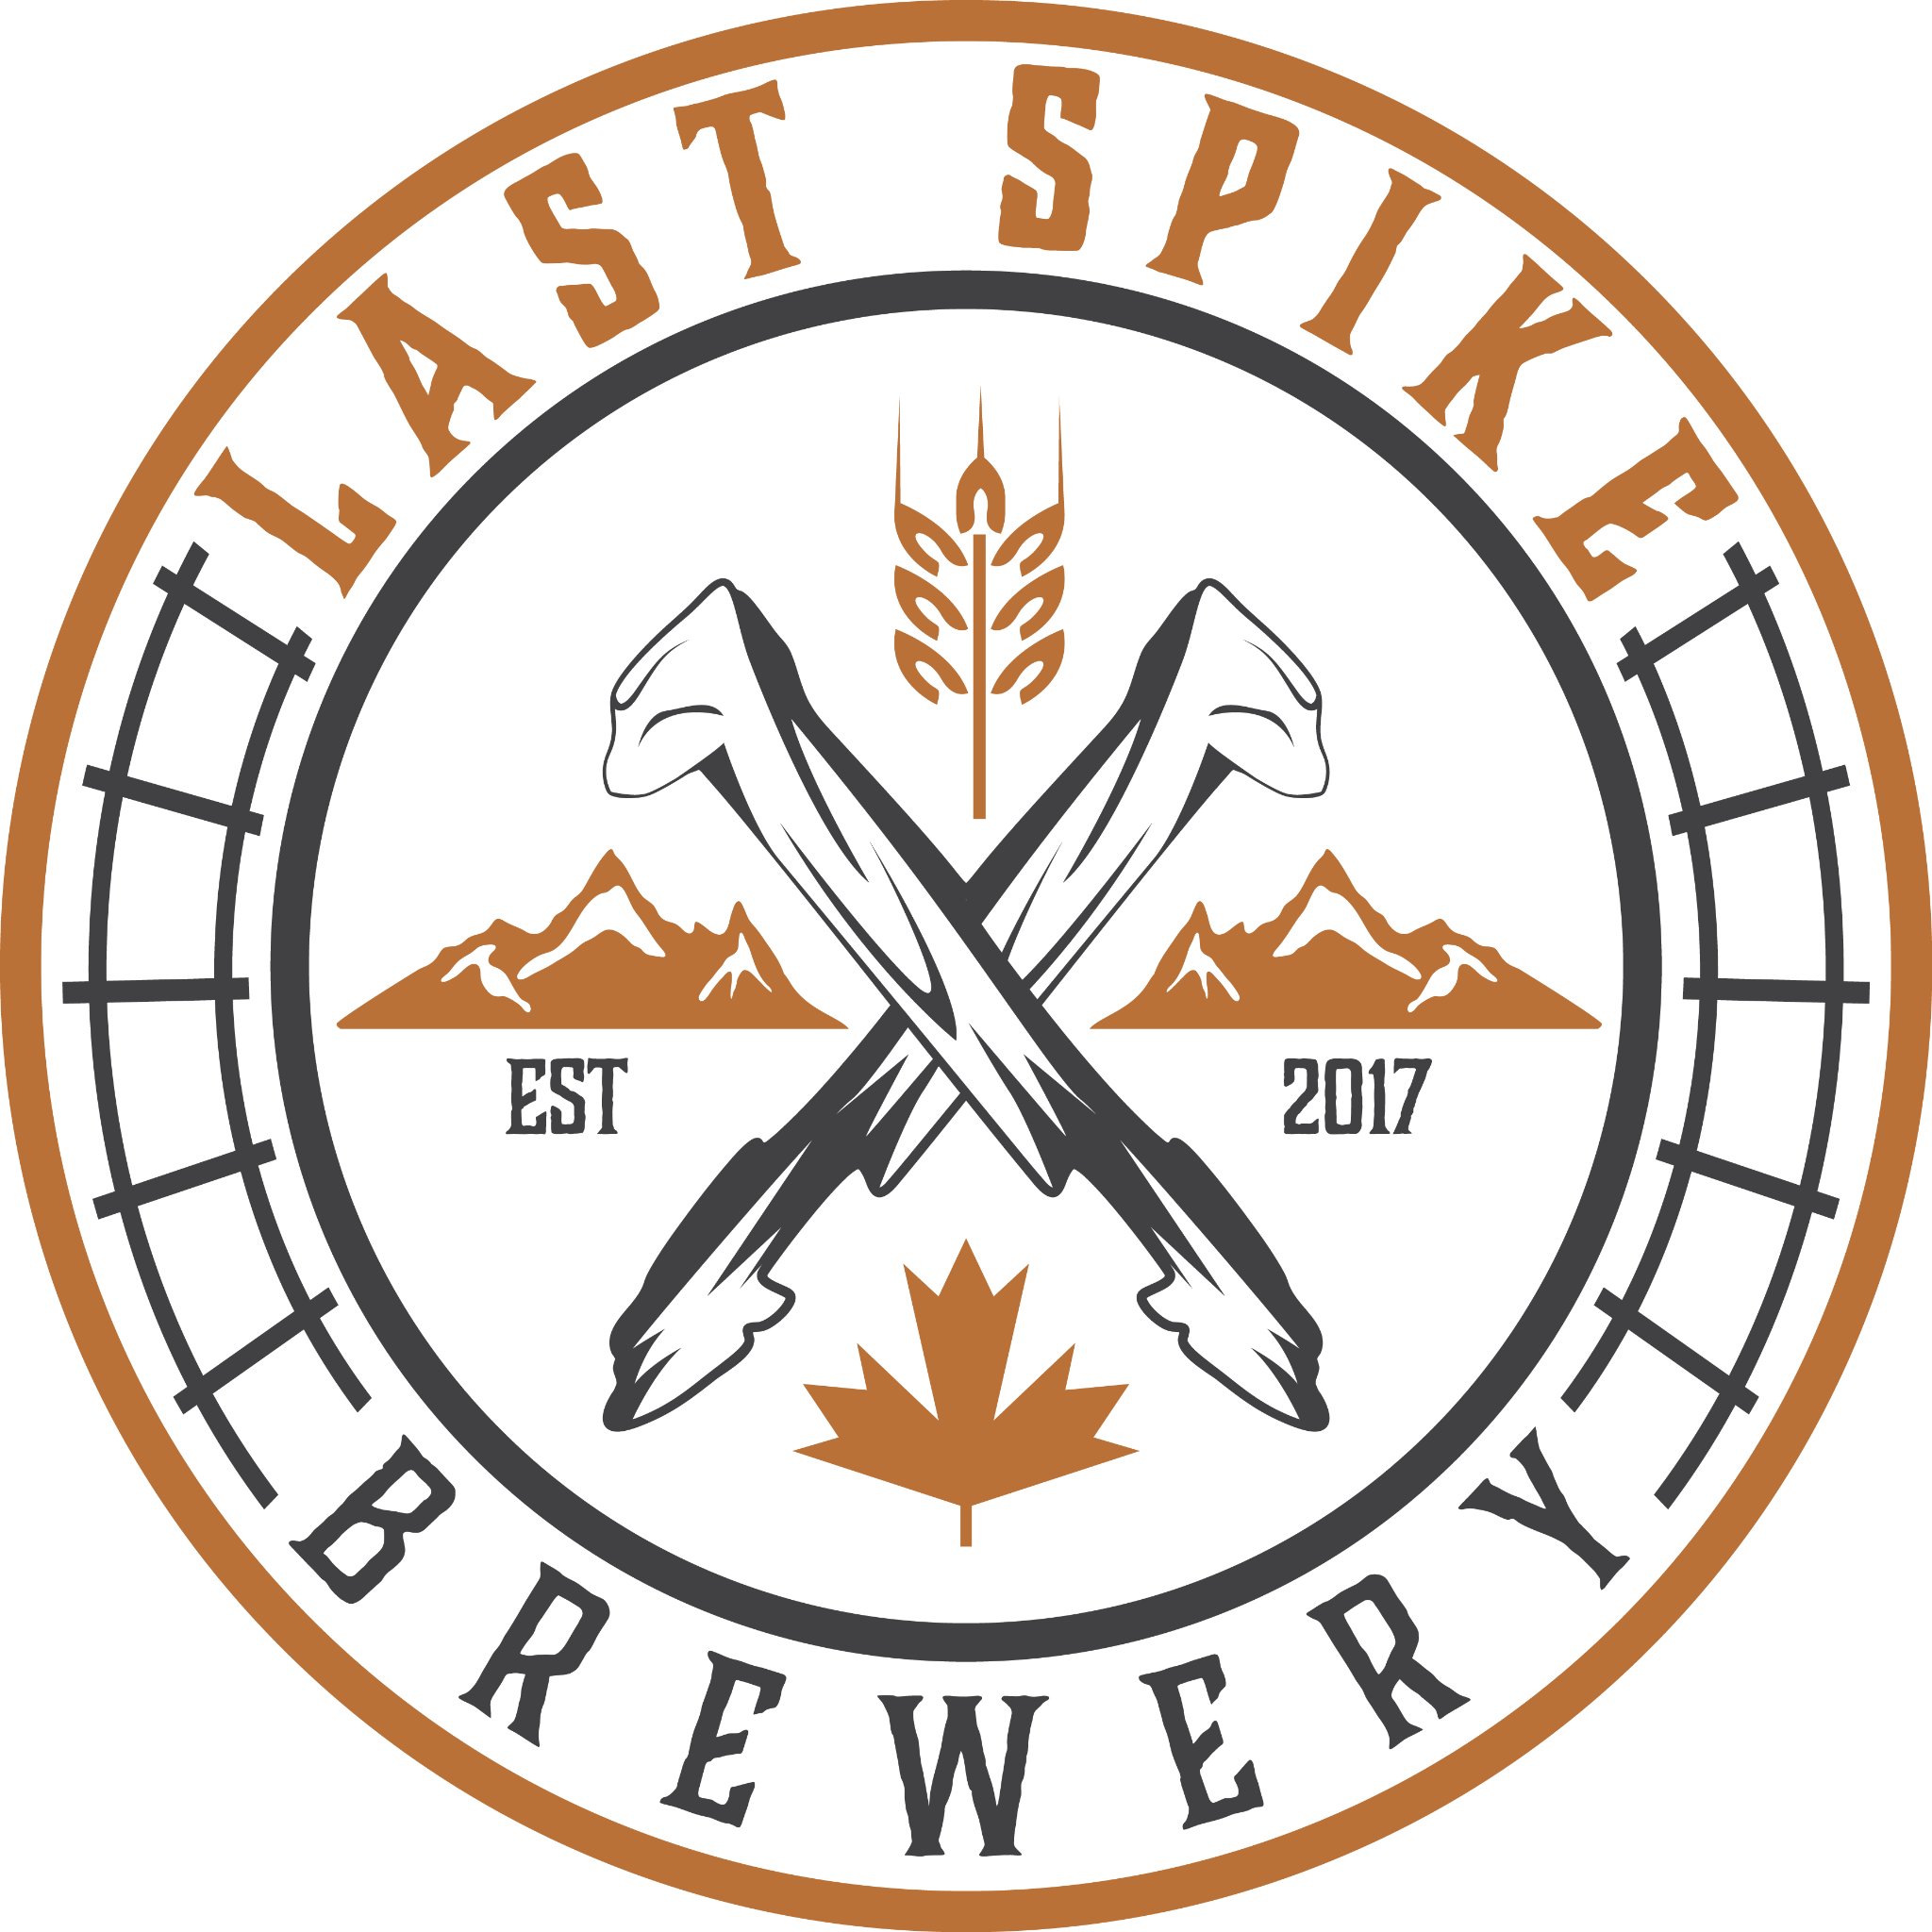 Last Spike is a partner brewery specializing in the brewing, canning, kegging, and packaging of beer for local, national, and international clients.